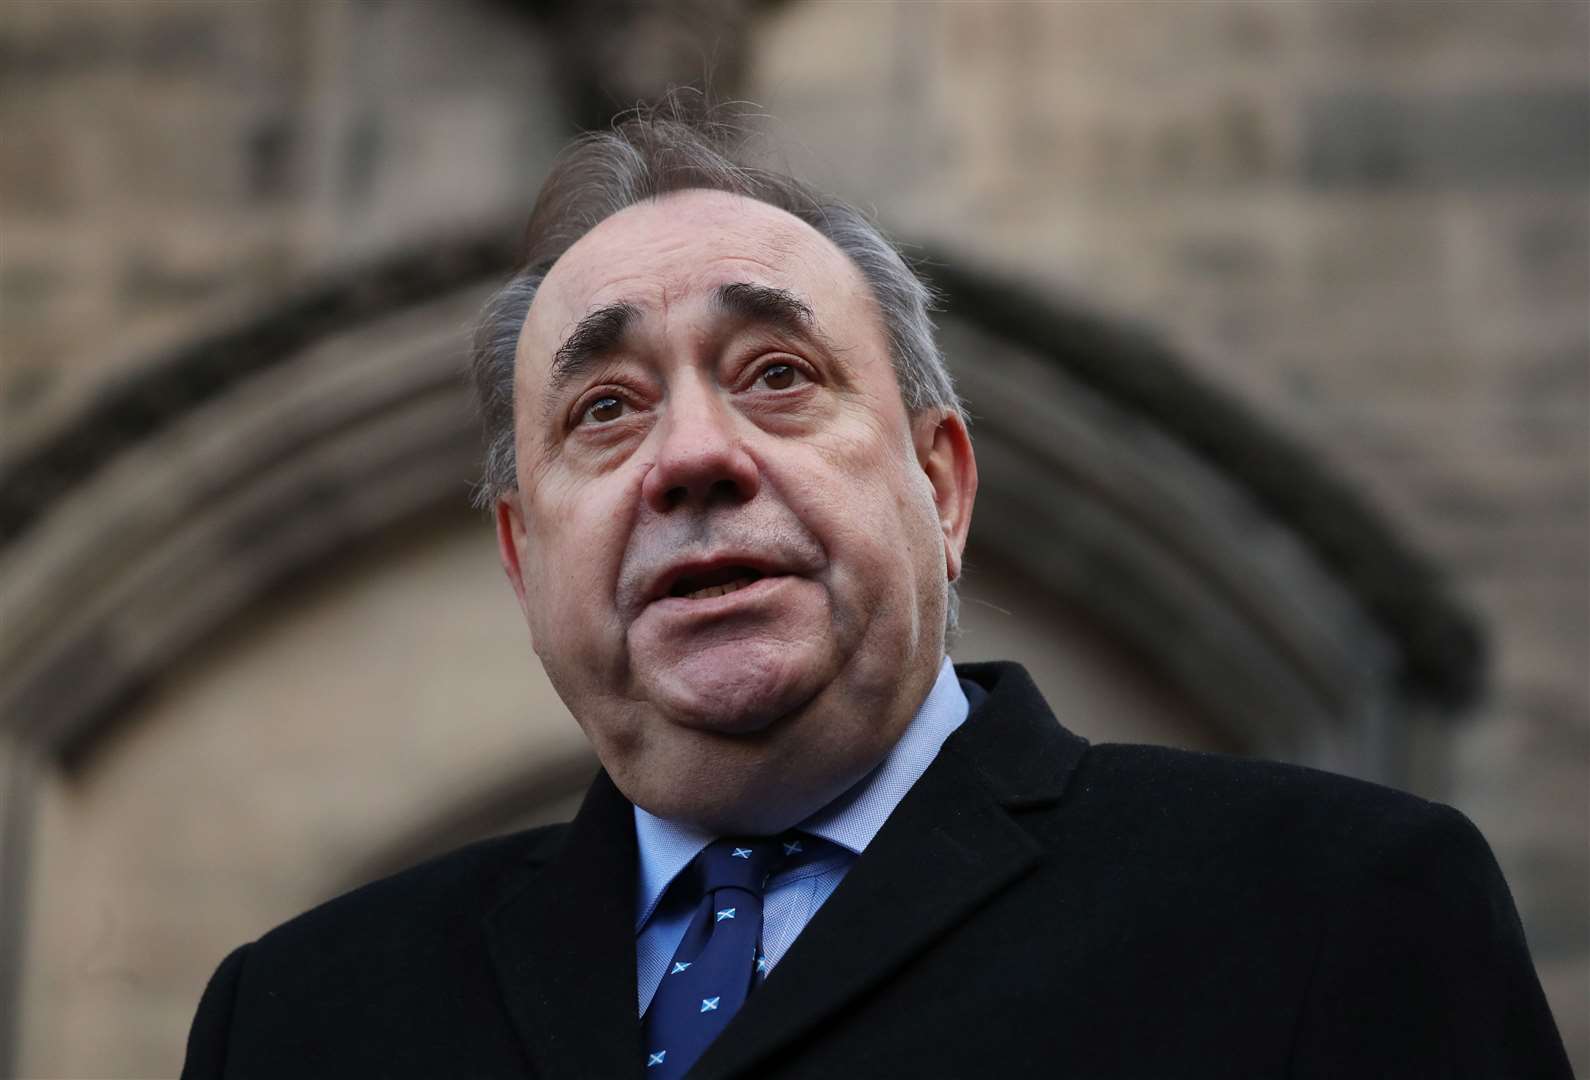 Alex Salmond successfully challenged the Scottish Government in court over its handling of complaints against him (Jane Barlow/PA)